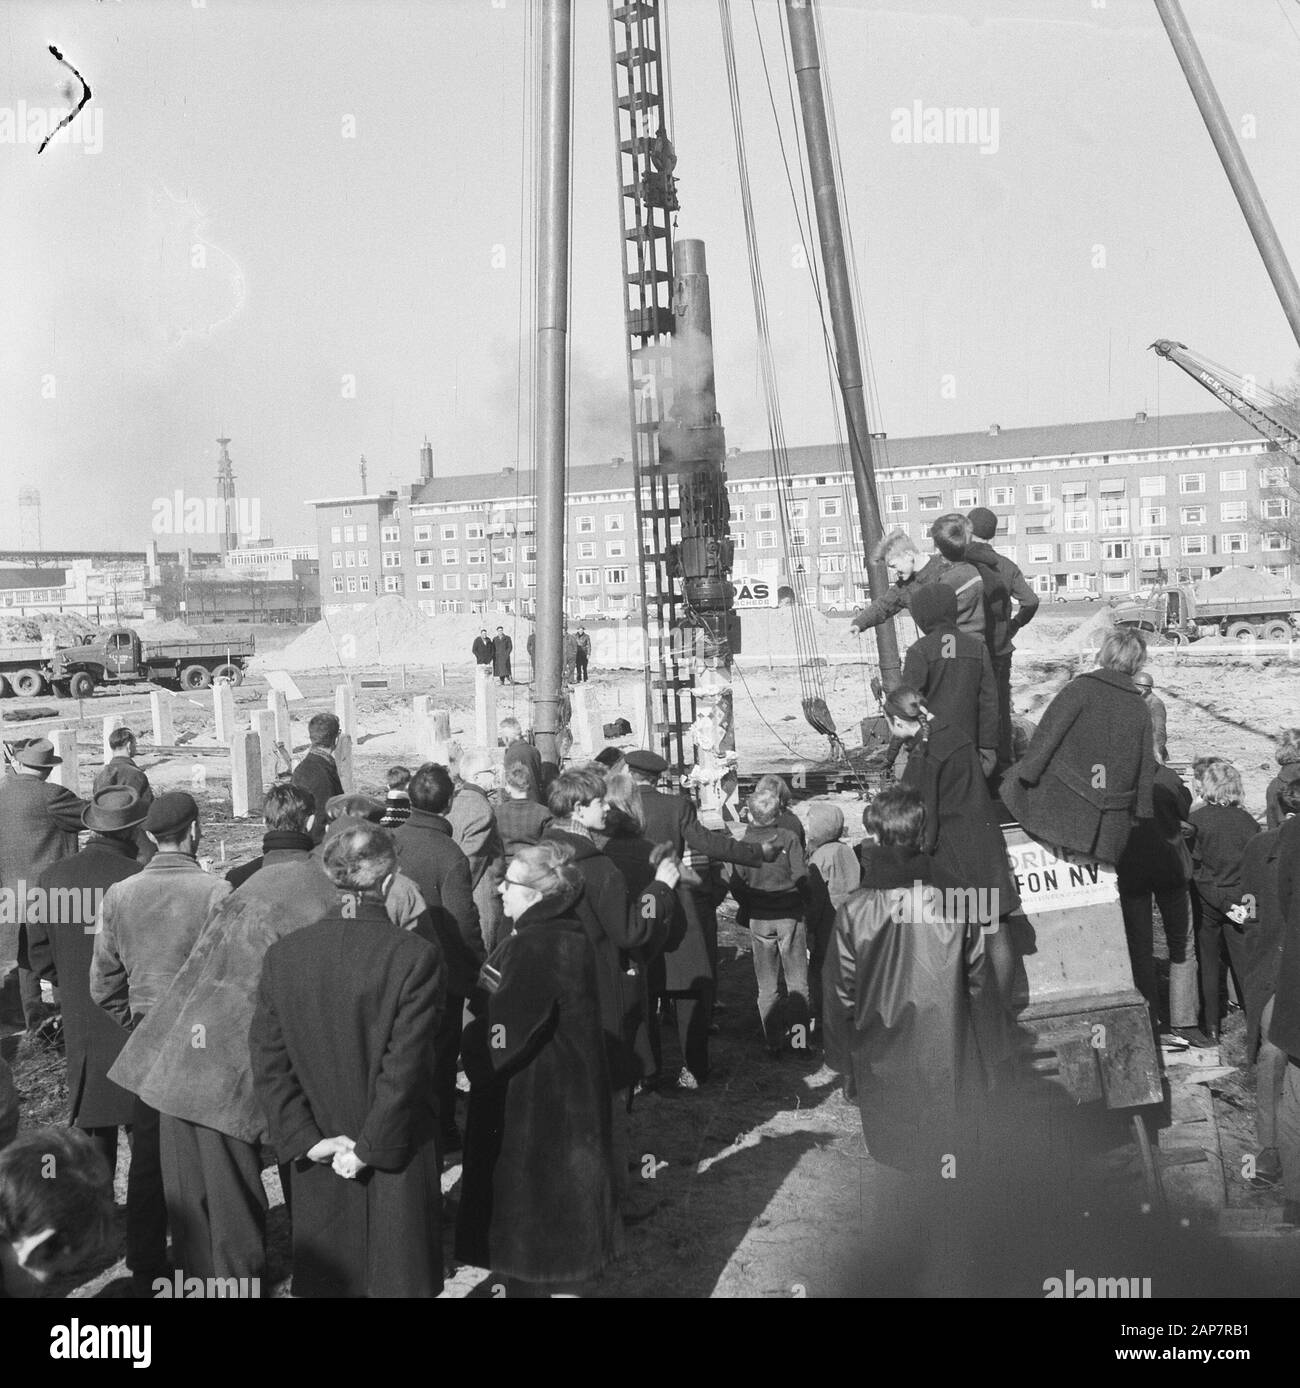 Mayor Van Hall 1e paal Institute Arts & Industry (Amstelveenseweg), reports and overviews Date: March 9, 1964 Keywords: mayors Stock Photo